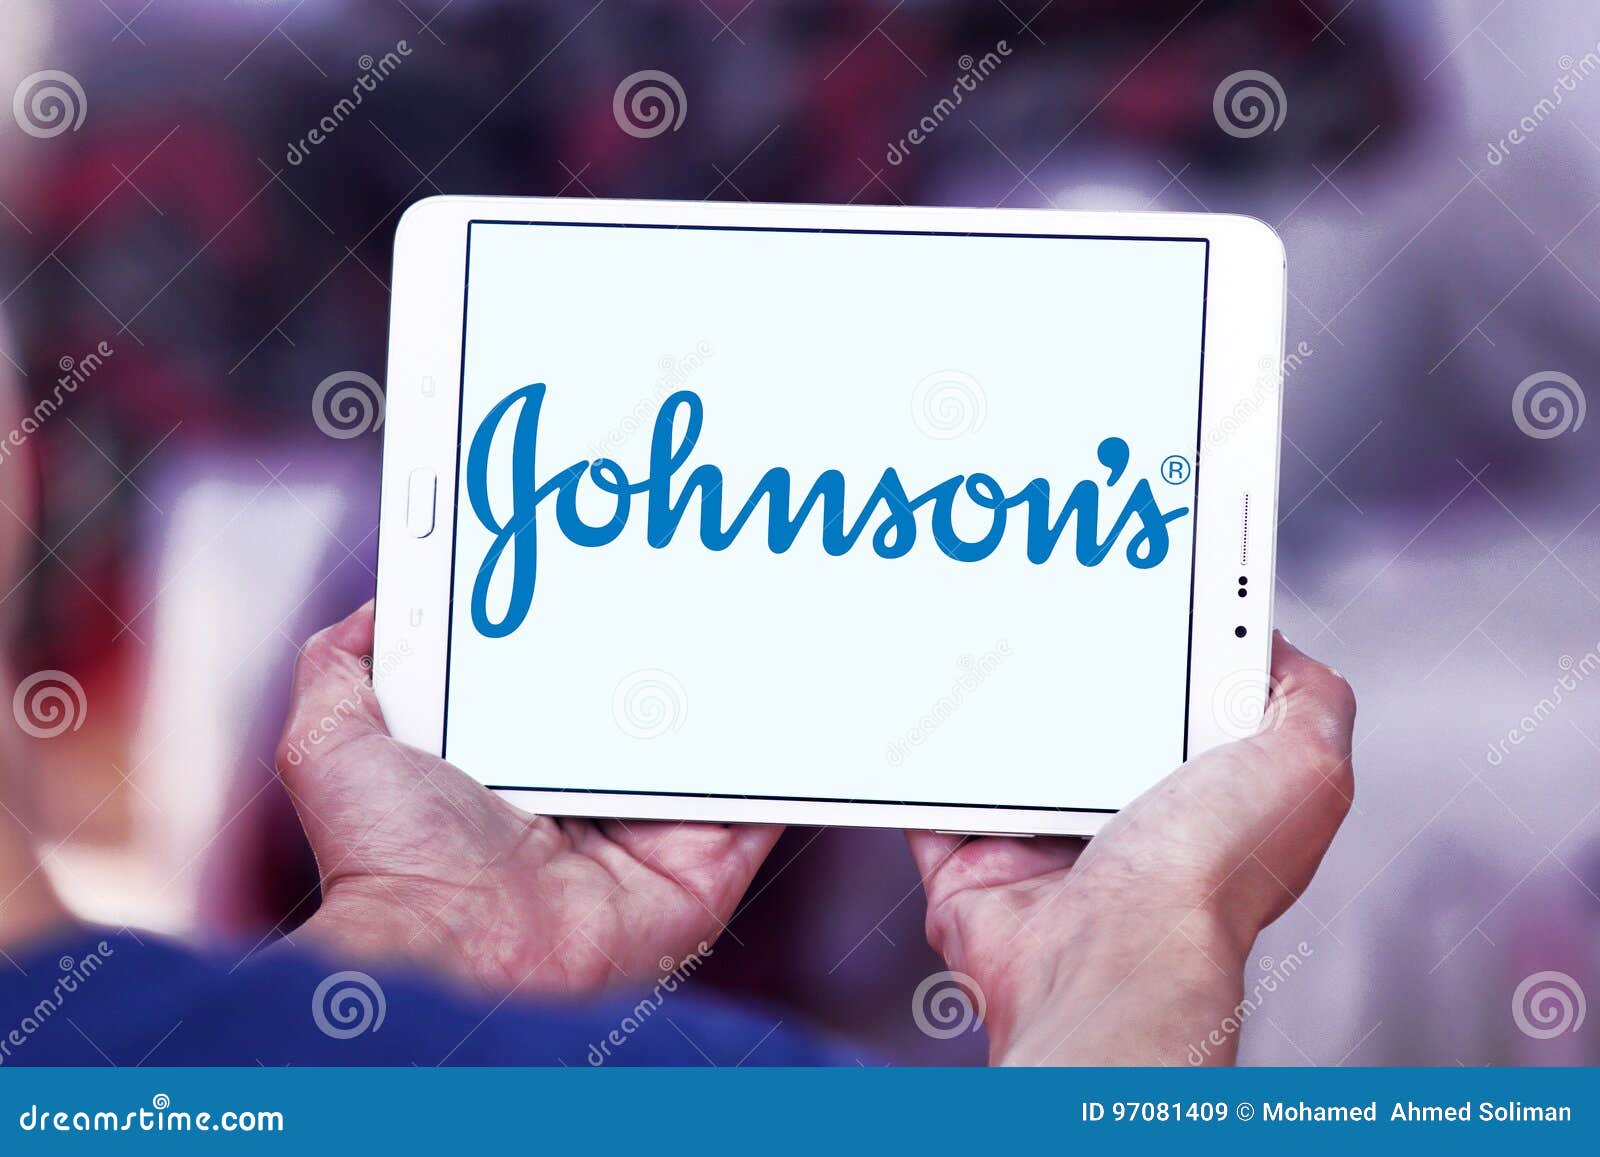 Johnsons logo editorial stock image. Image of brands - 97081409